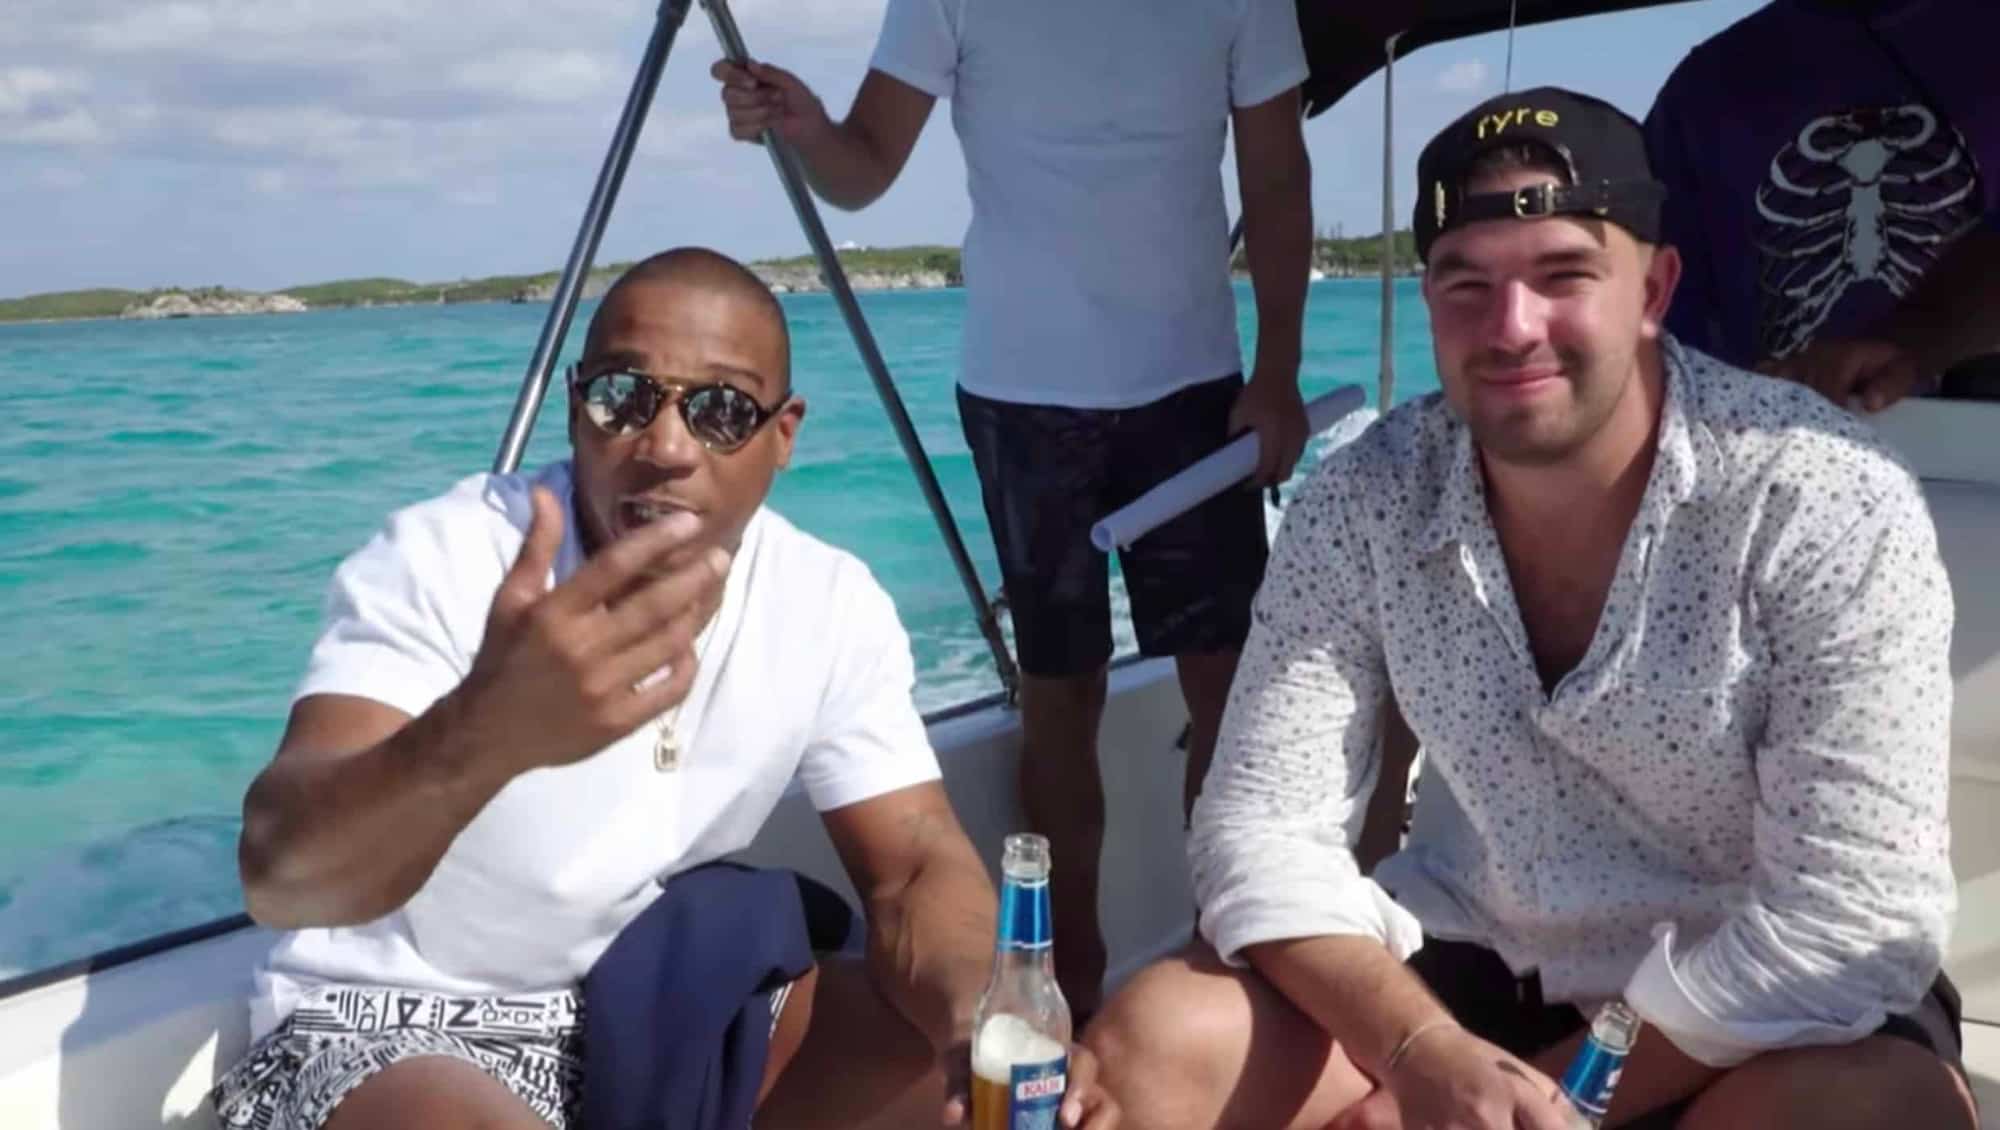 Ja Rule Billy McFarland of Fyre Festival, the notoriously bad marketing example